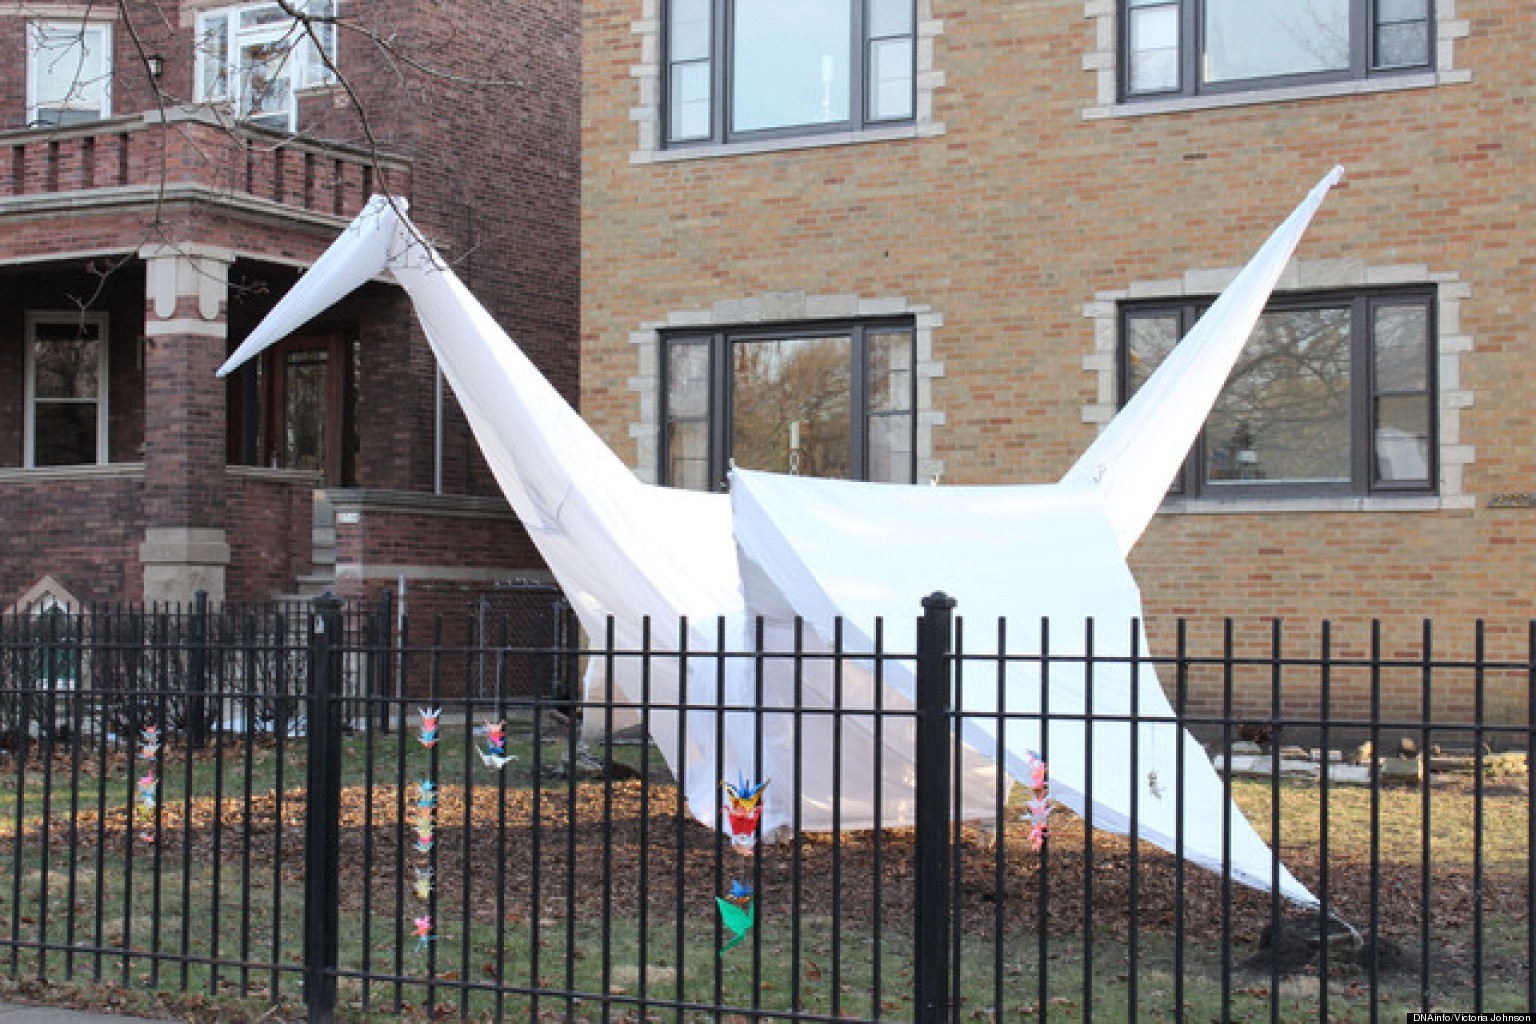 giant-origami-crane-represents-peace-in-the-new-year-creator-says